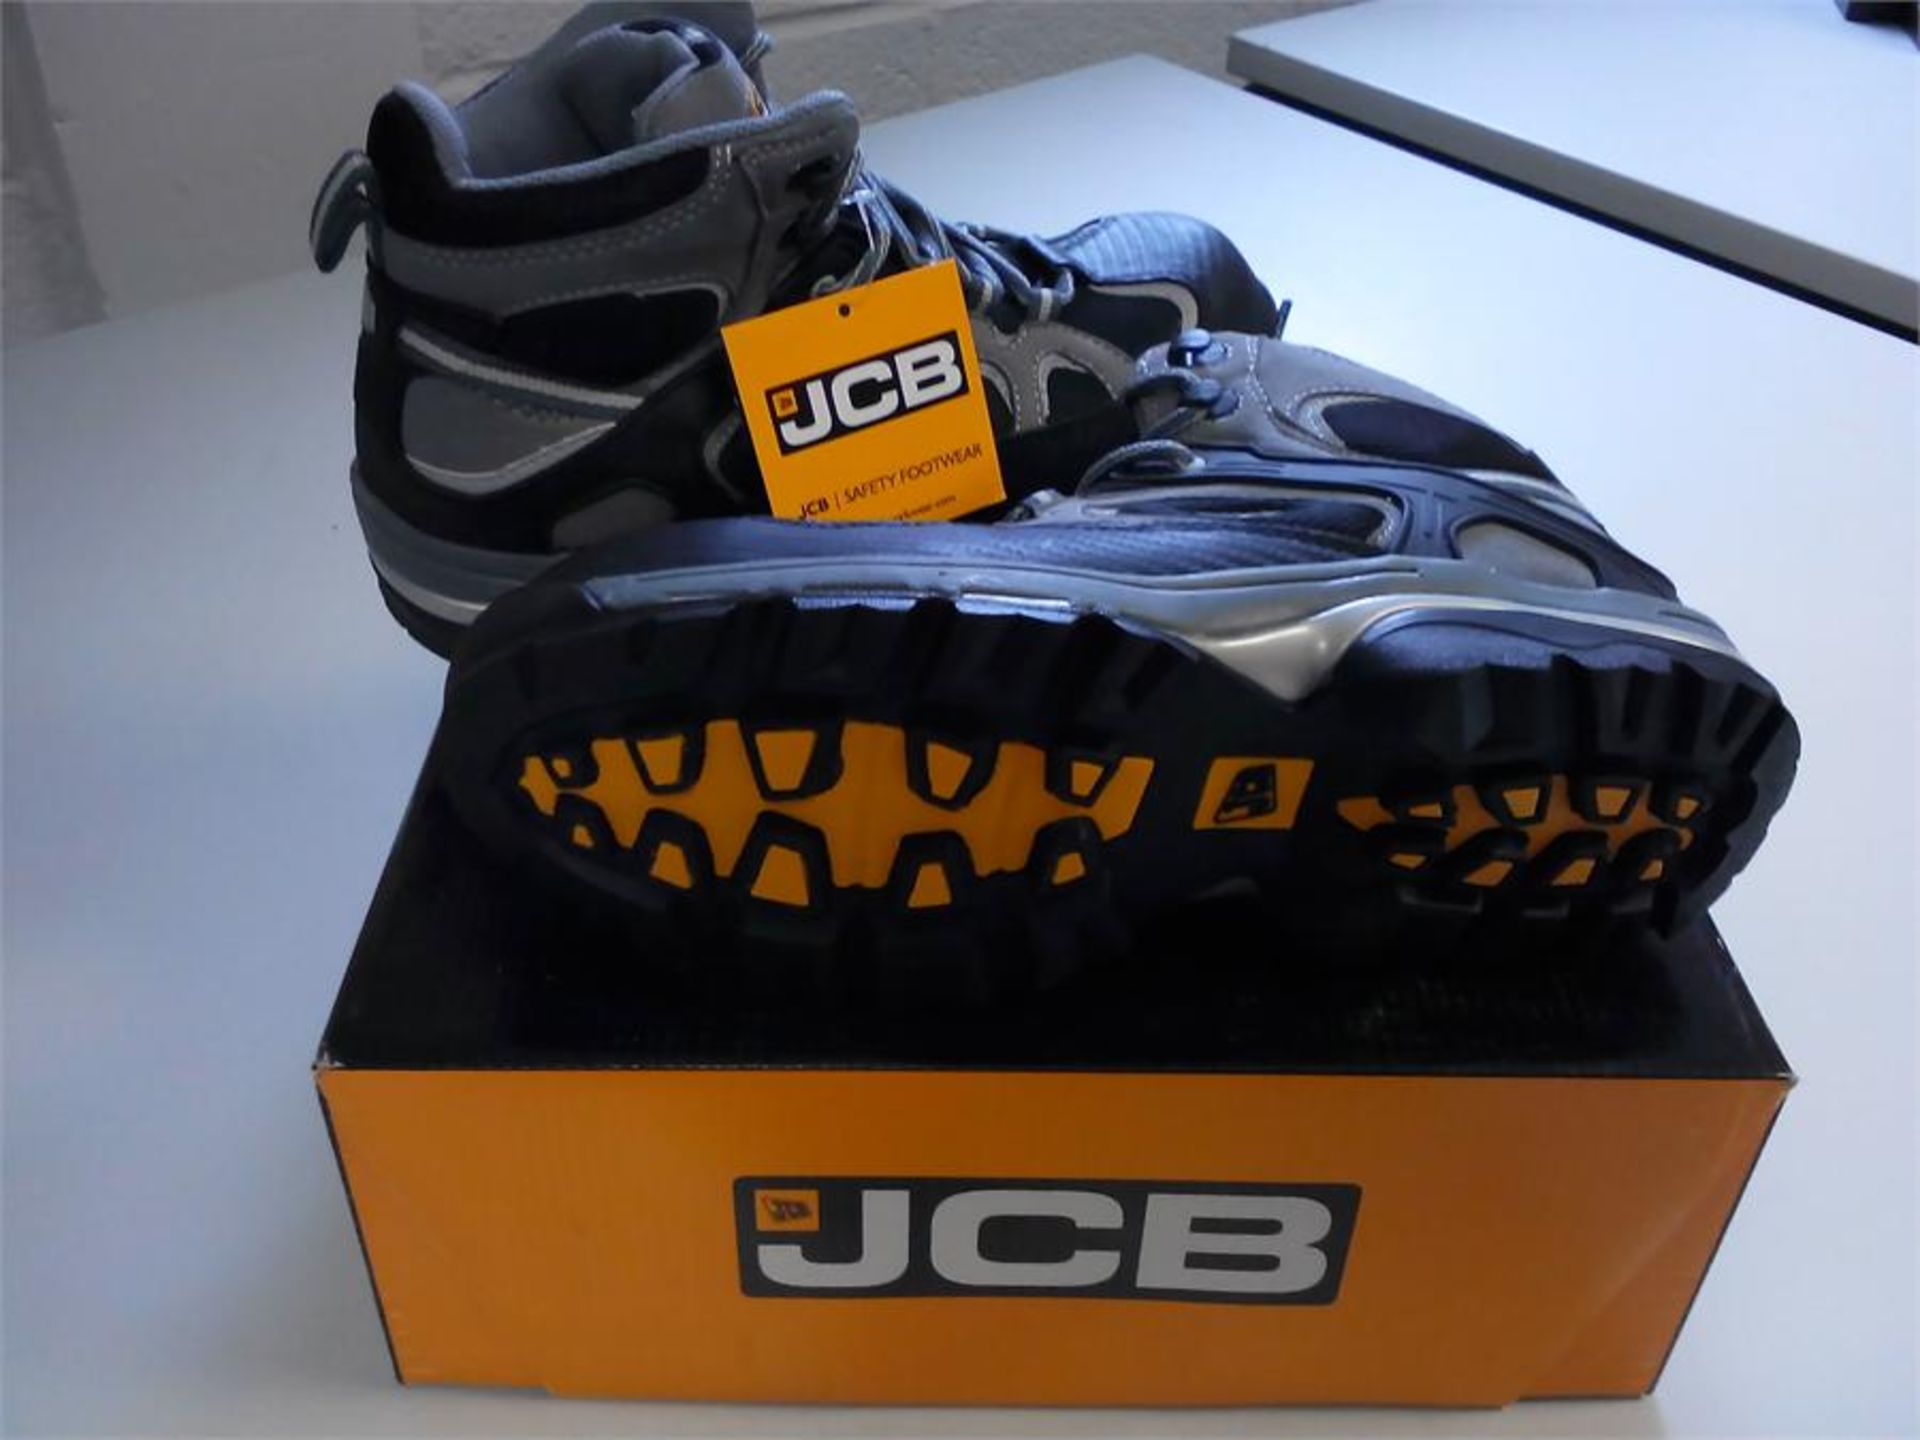 JCB Safety Boots NEW Boxed - RRP £40 - UK Size 8 / USA 9 / EURO 42 - Grey/Black Microfiber/Mesh - Image 2 of 2